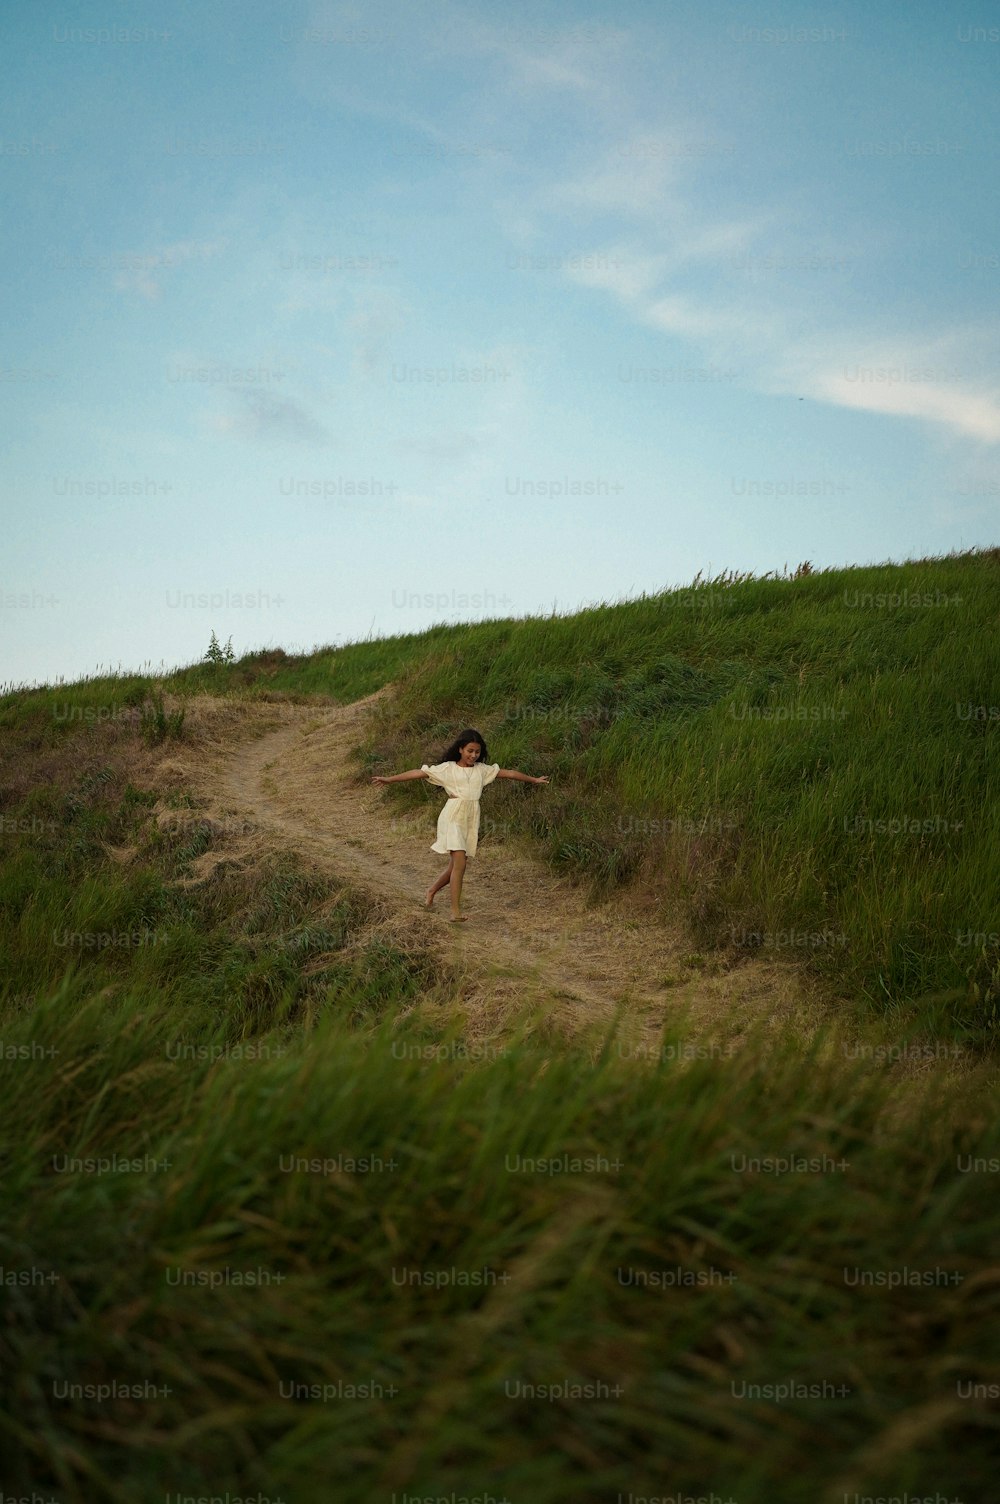 a young girl in a white dress standing on a dirt road